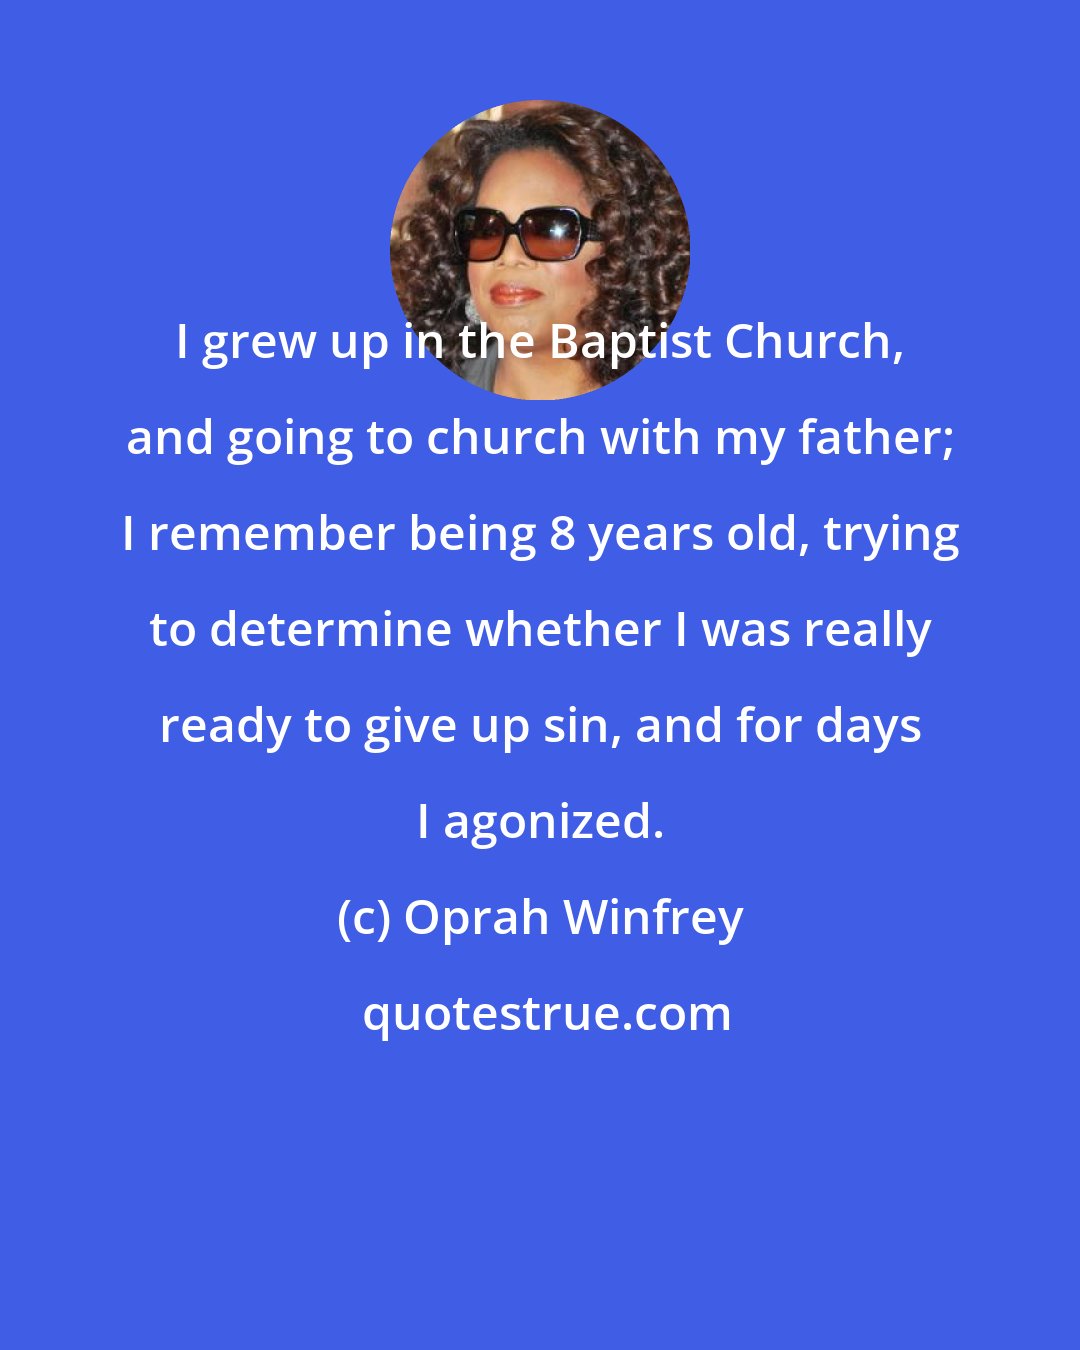 Oprah Winfrey: I grew up in the Baptist Church, and going to church with my father; I remember being 8 years old, trying to determine whether I was really ready to give up sin, and for days I agonized.